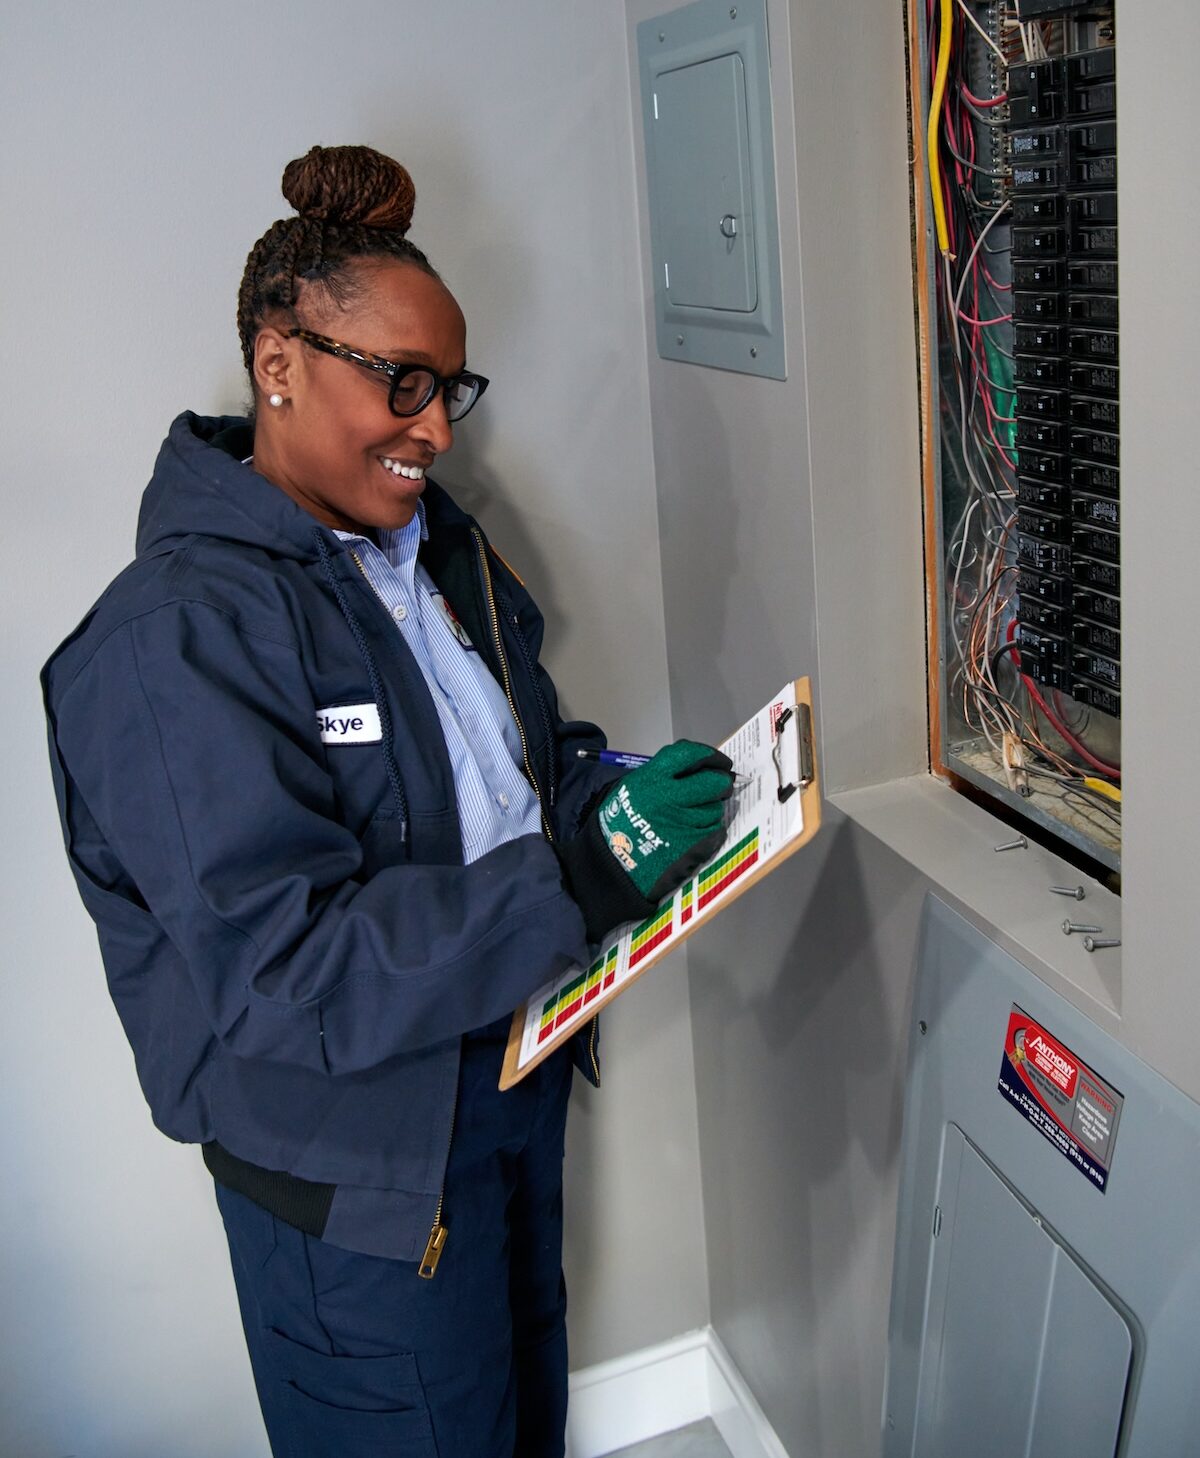 Technician working on electrical panel